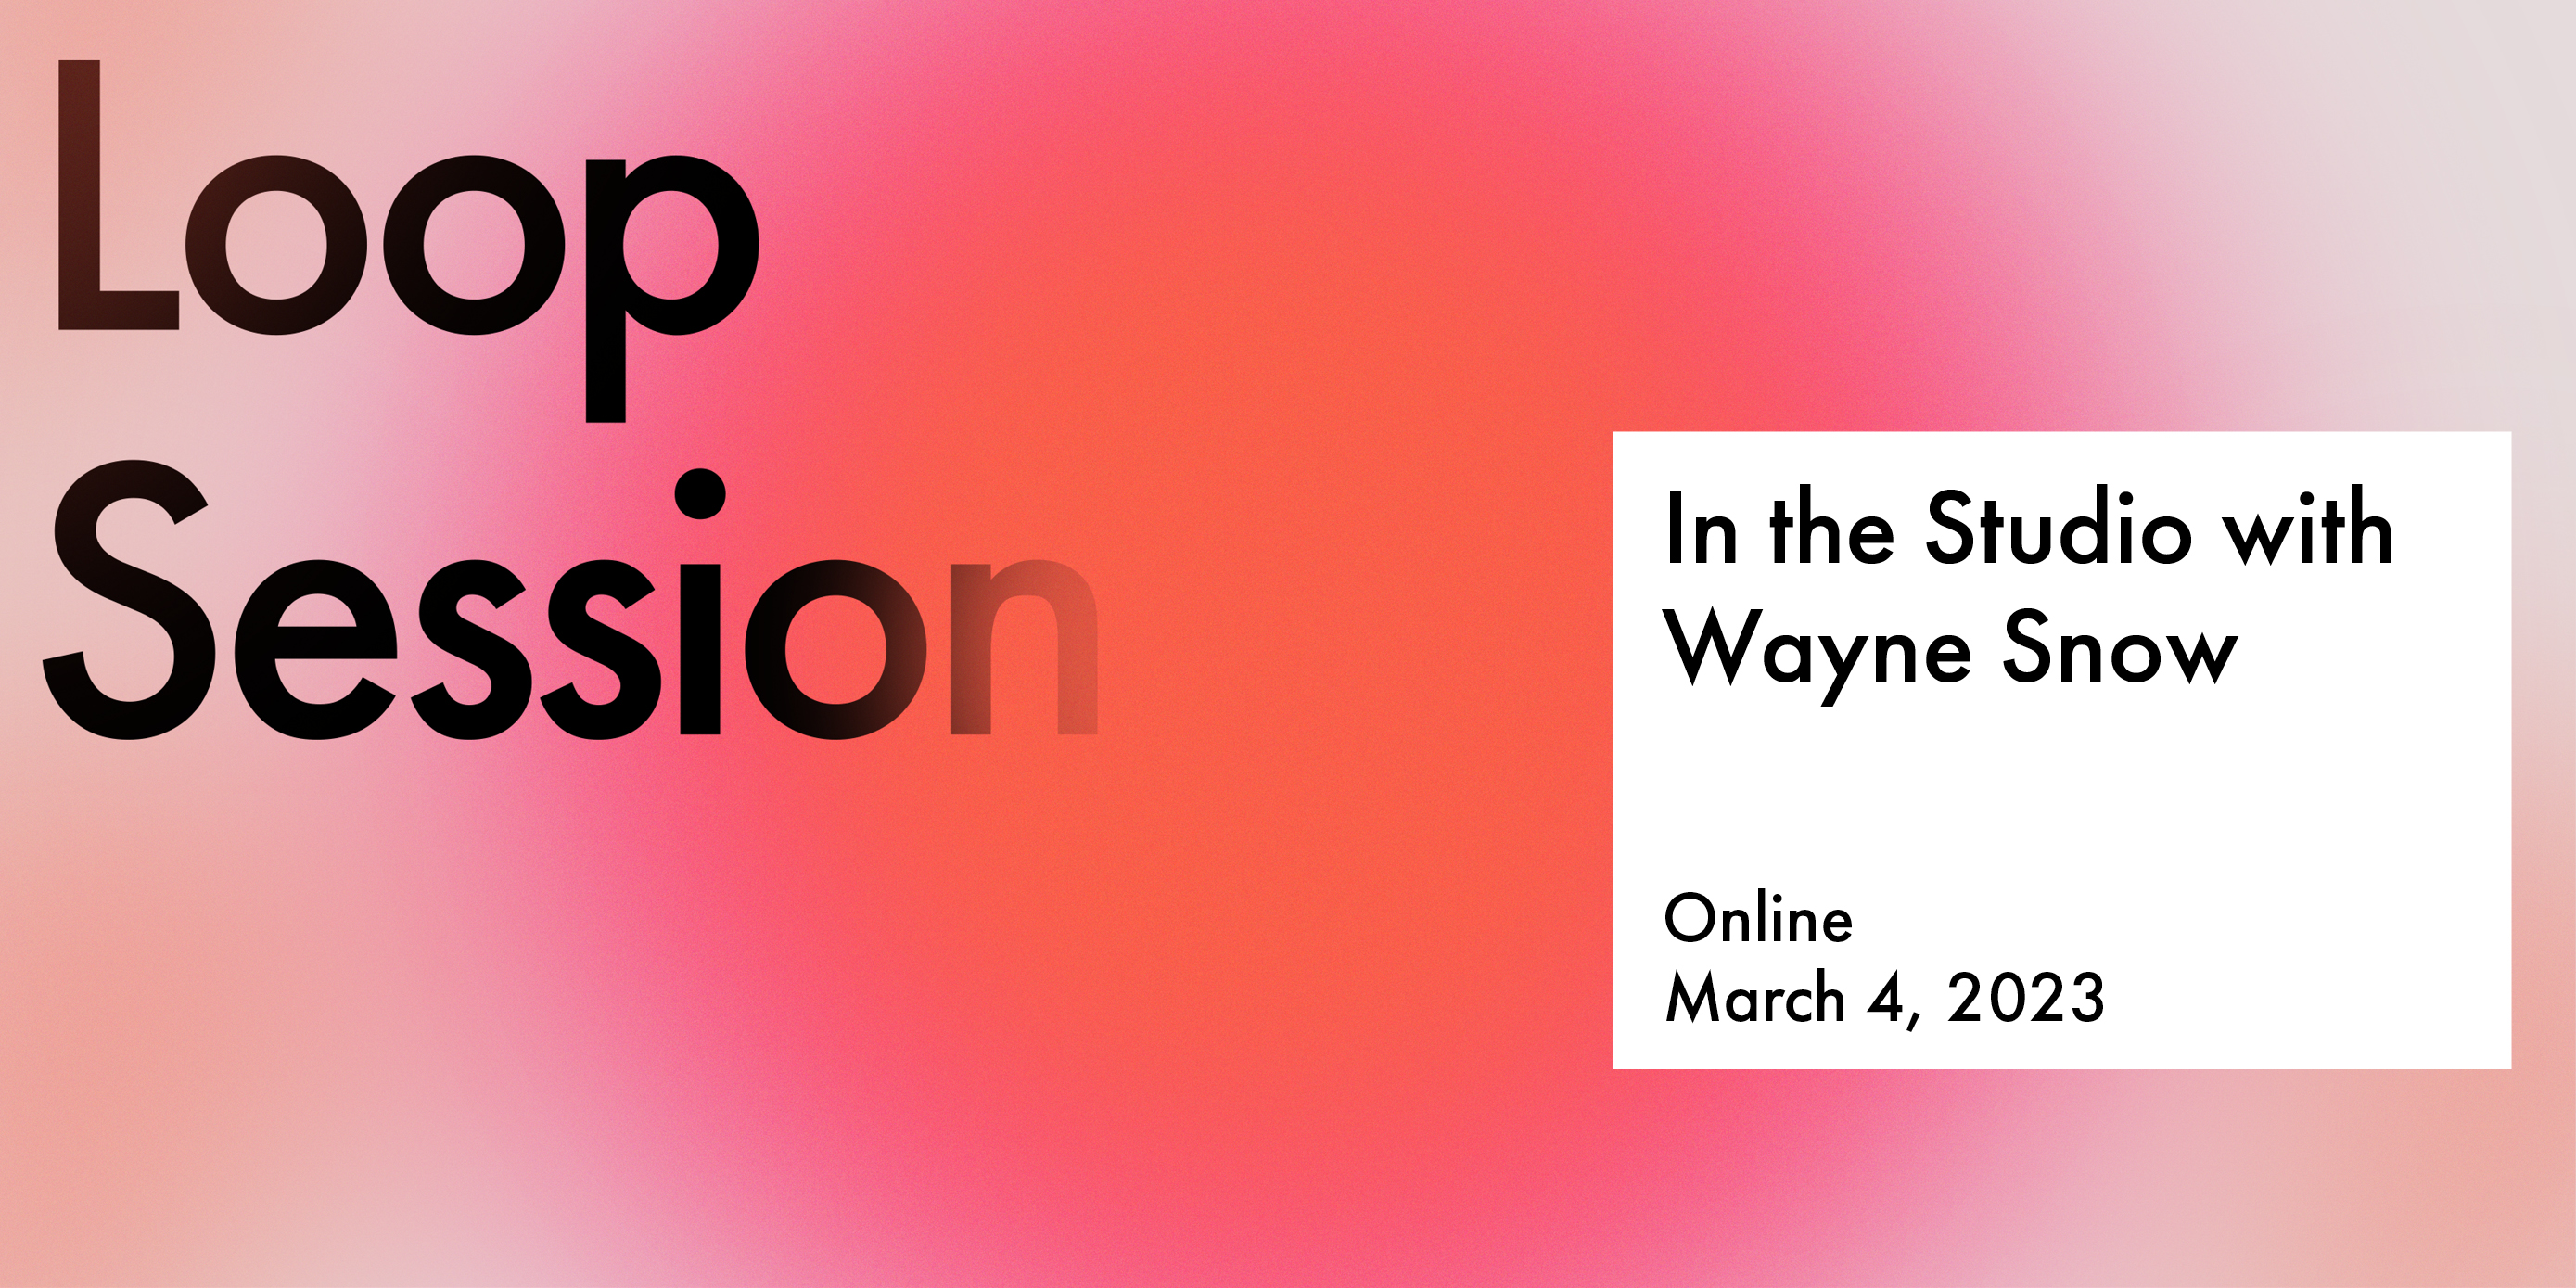 Loop Session: Catch Wayne Snow Streaming Live from the Studio